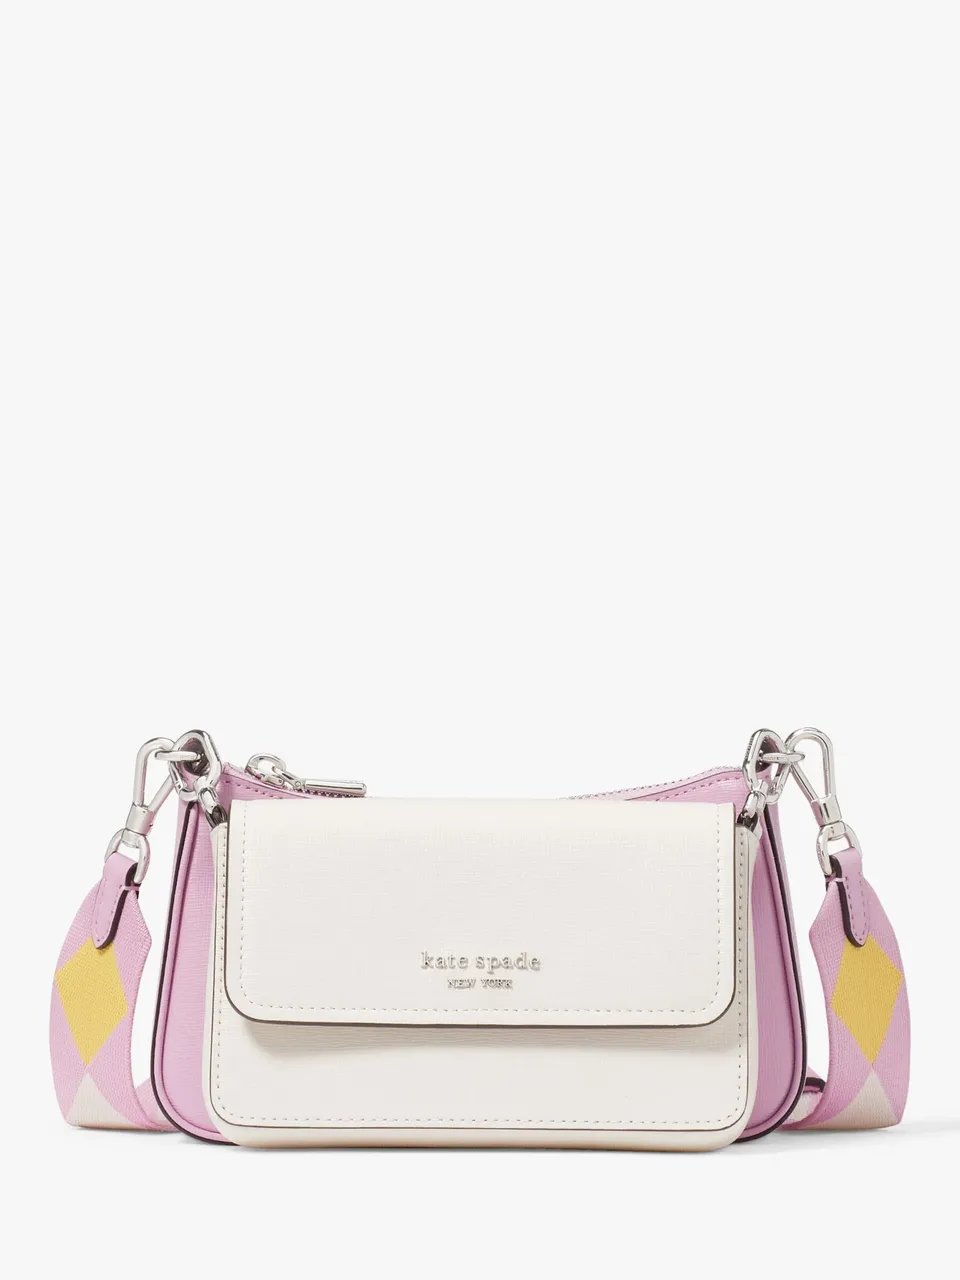 kate spade new york Double Up Leather Cross Body Bag, Parchment/Multi - Parchment/Multi - Female